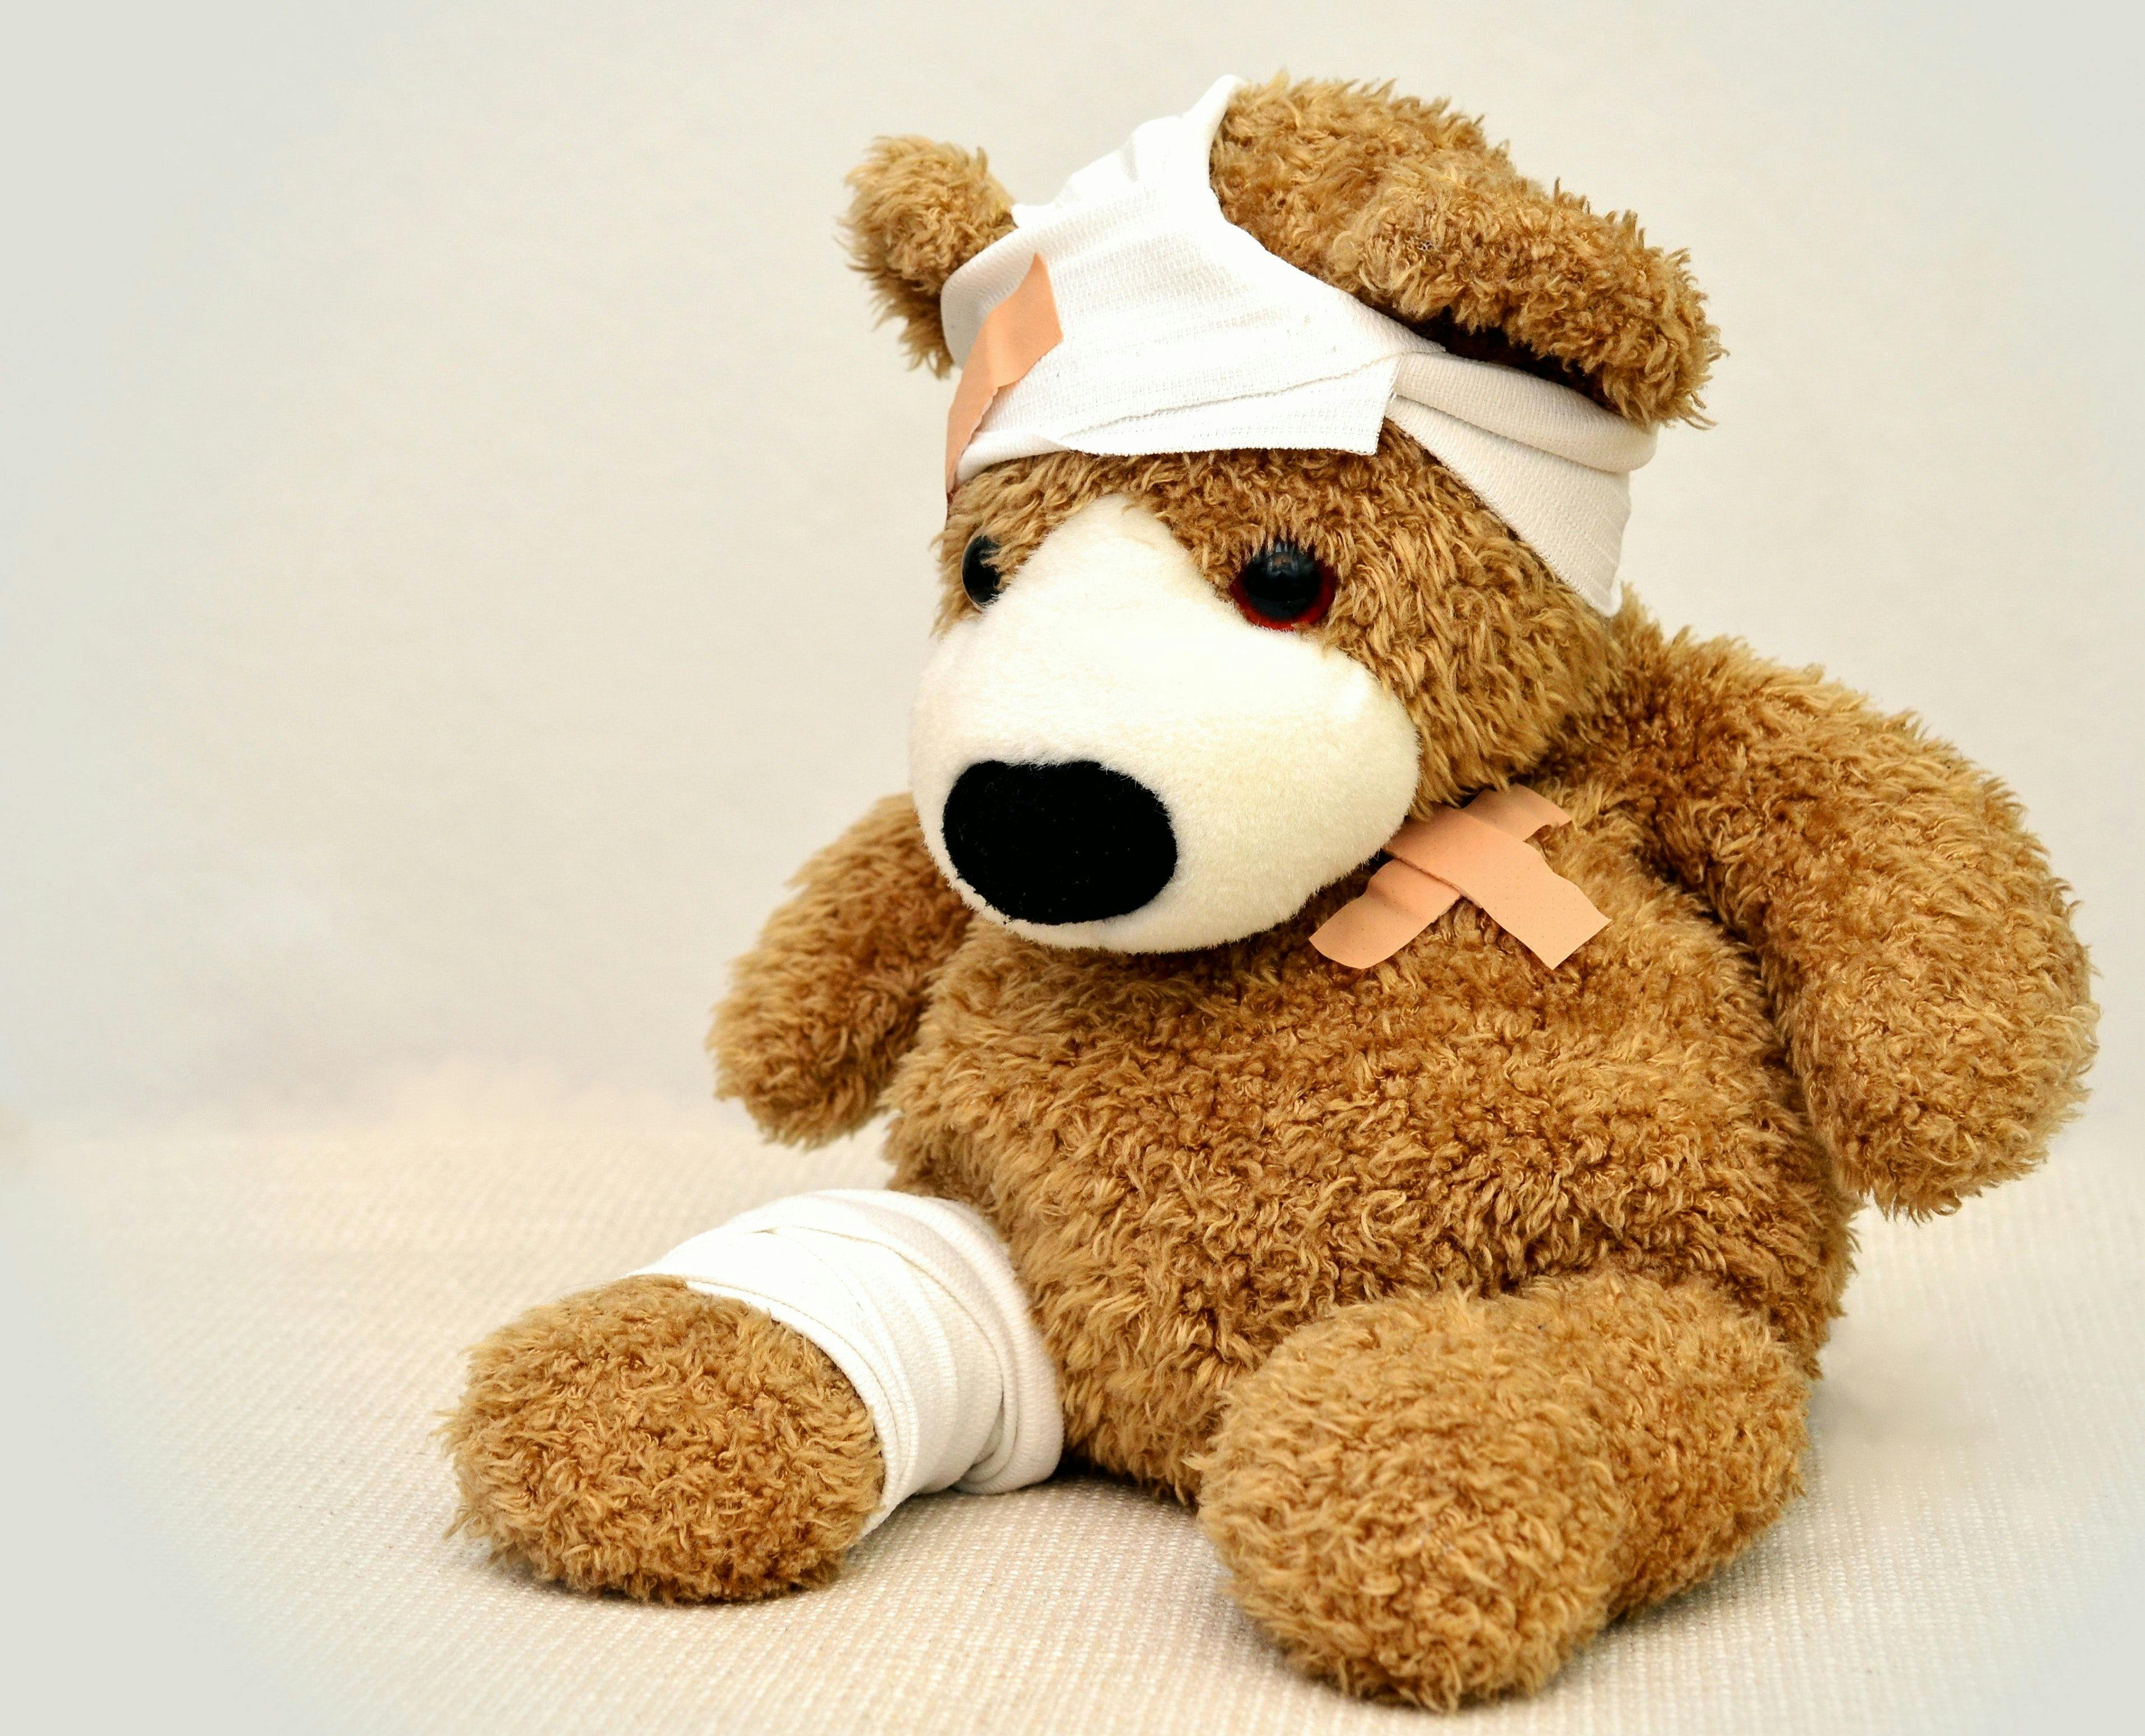 Paediatric First Aid Online